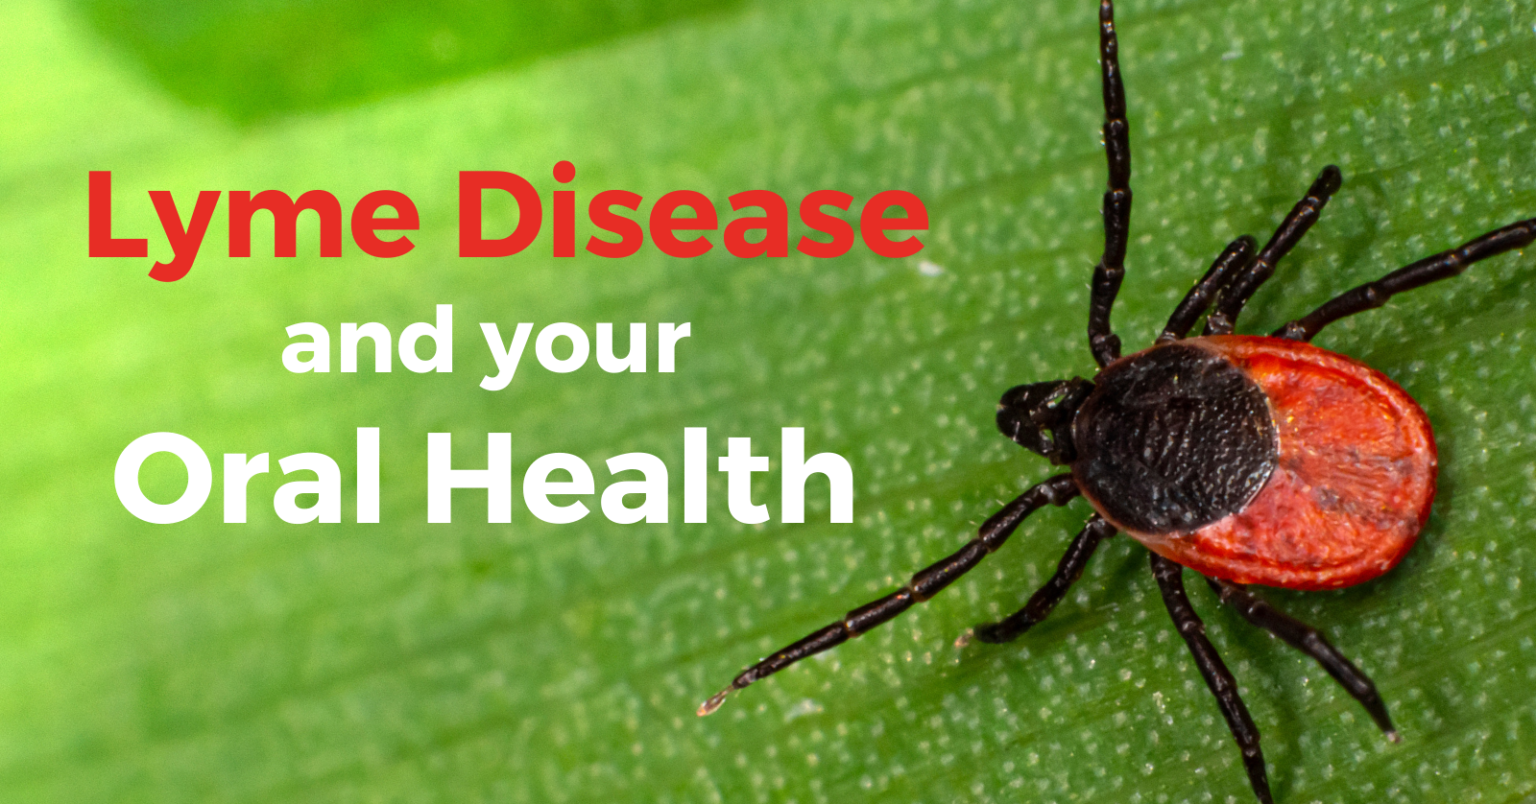 The Connection Between Lyme Disease and Oral Health